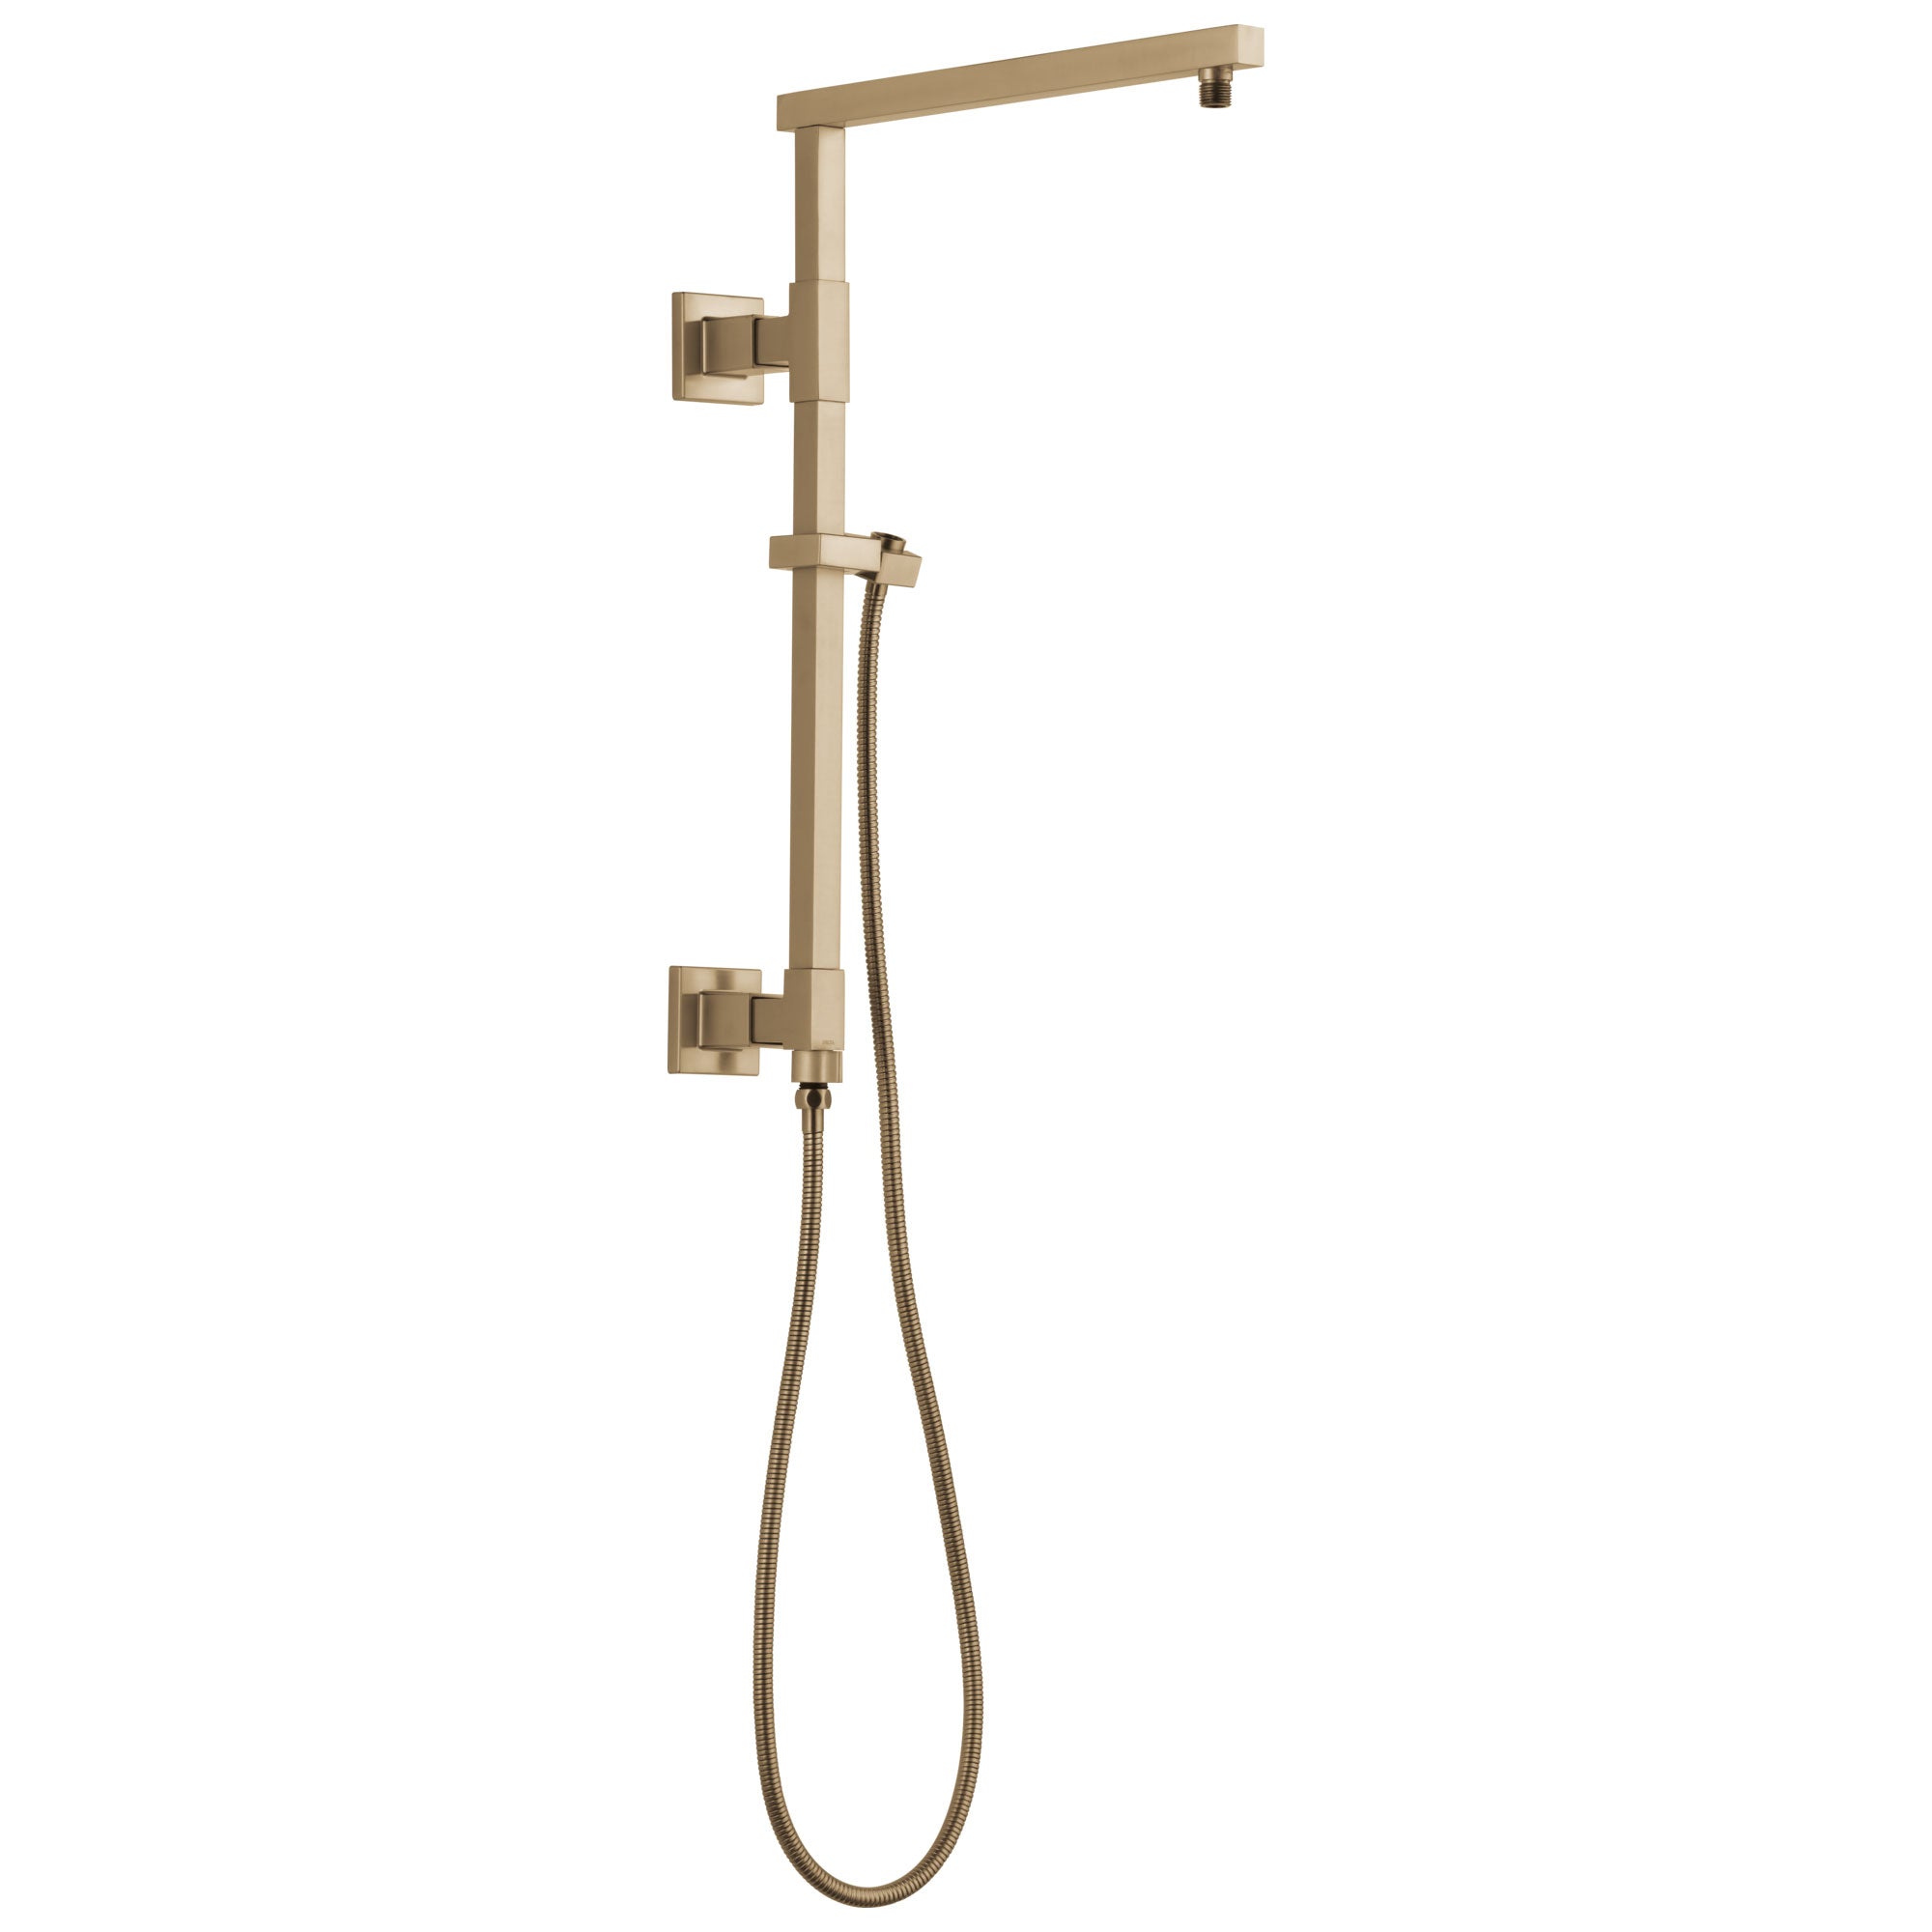 Delta Champagne Bronze Finish Emerge Modern Angular Square Shower Column 18" (Requires Showerhead, Hand Spray, and Control) D58410CZ